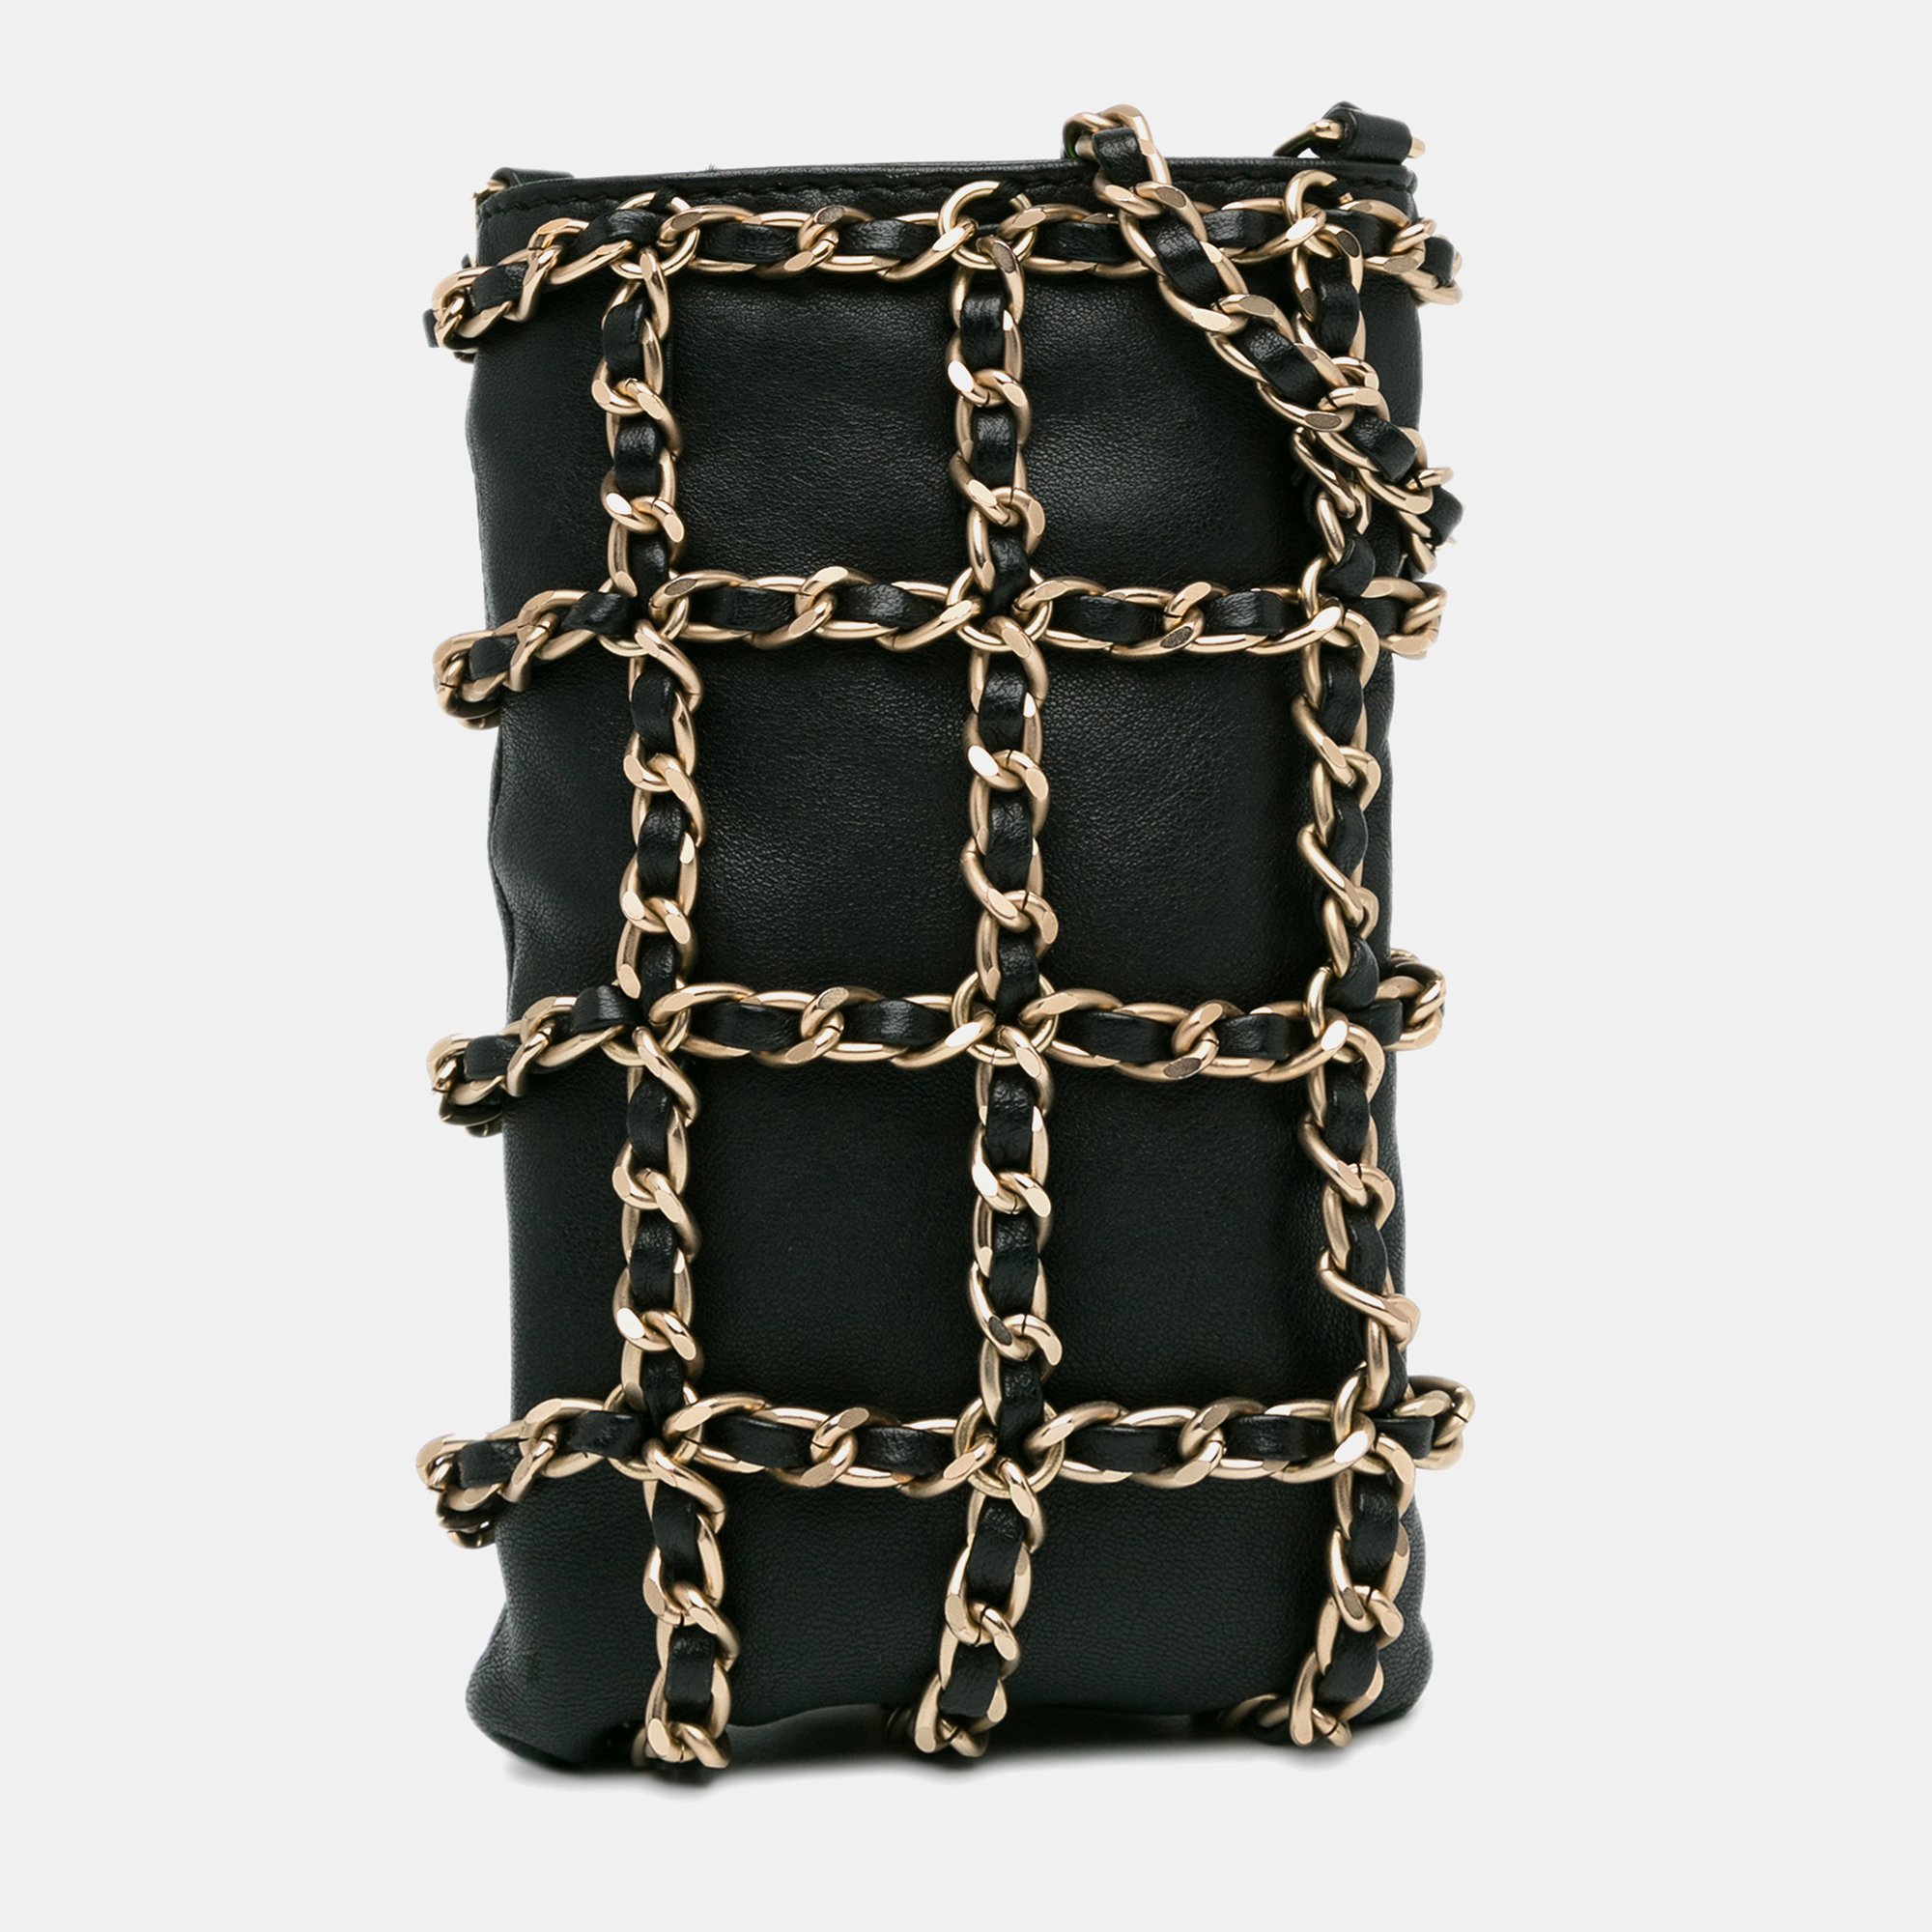 Chanel lambskin tech me out clutch with chain